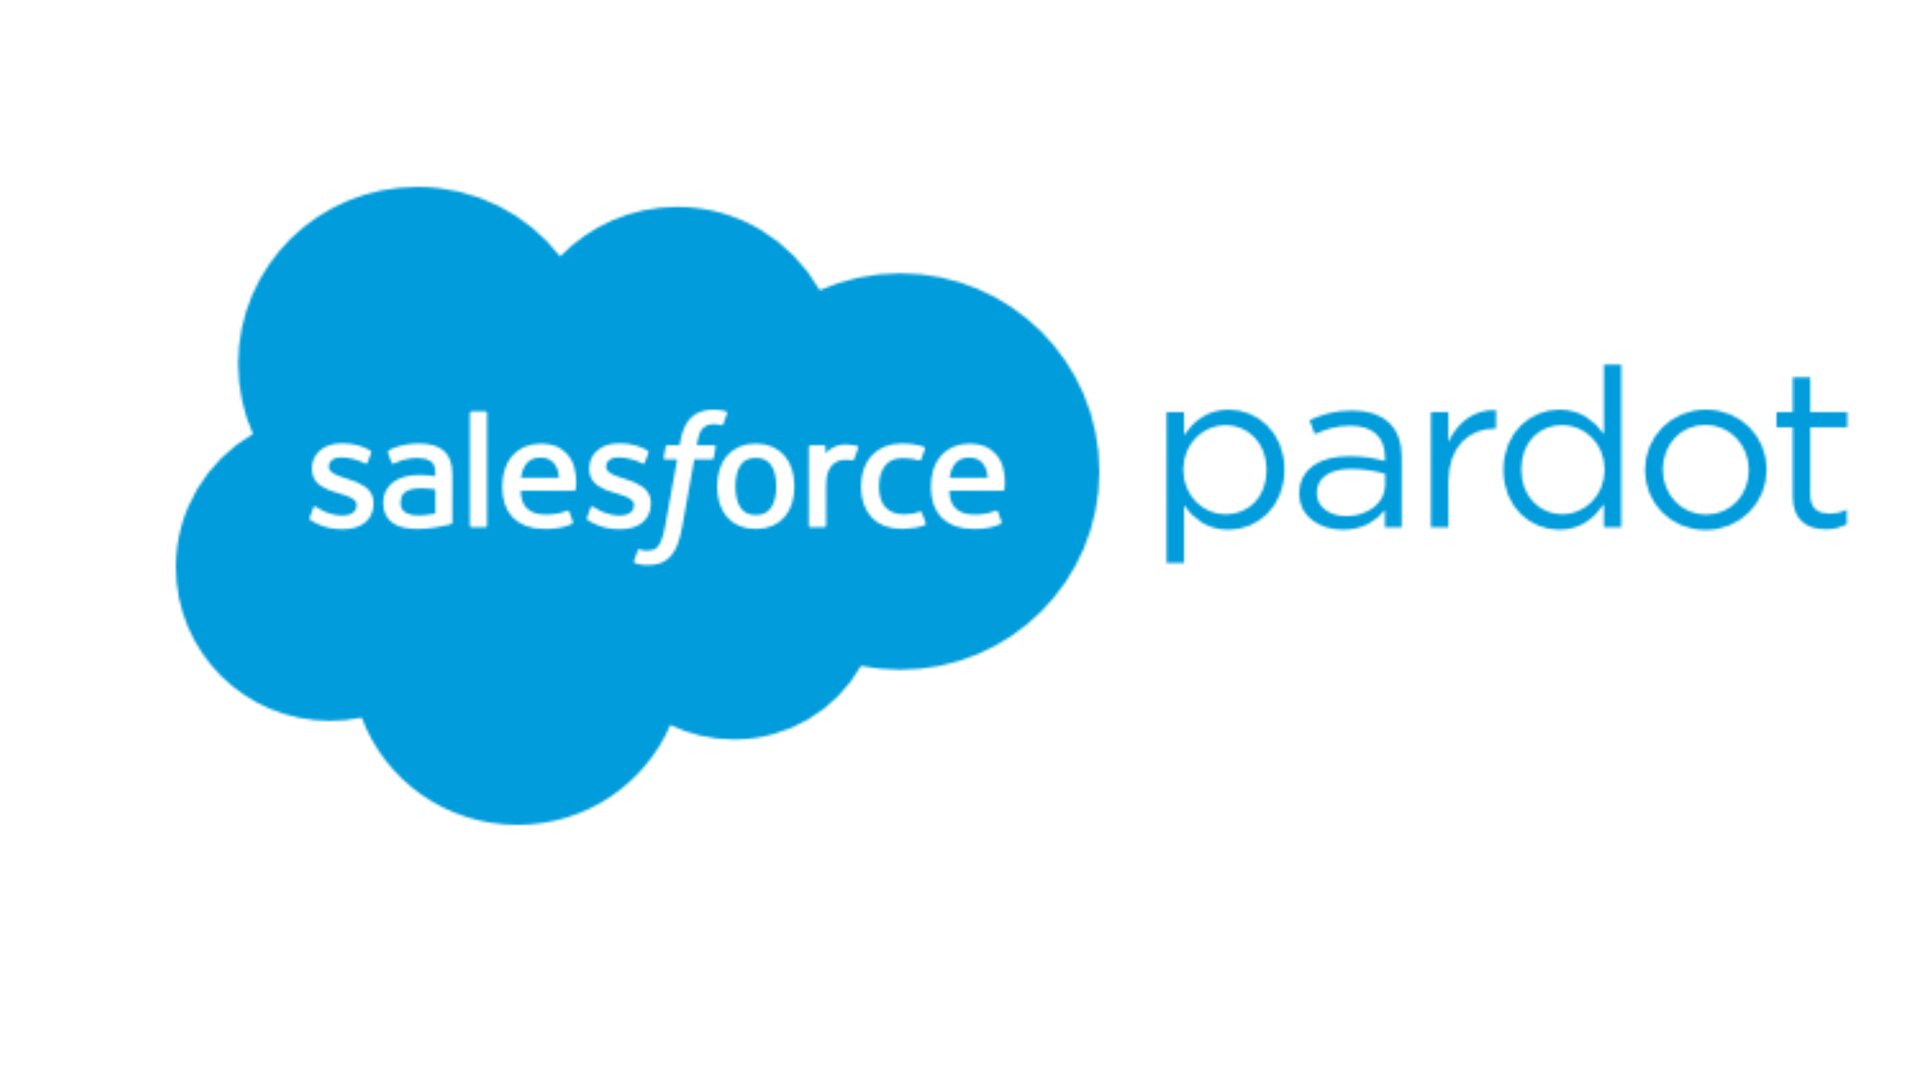 Why Did Pardot Change Its Name?